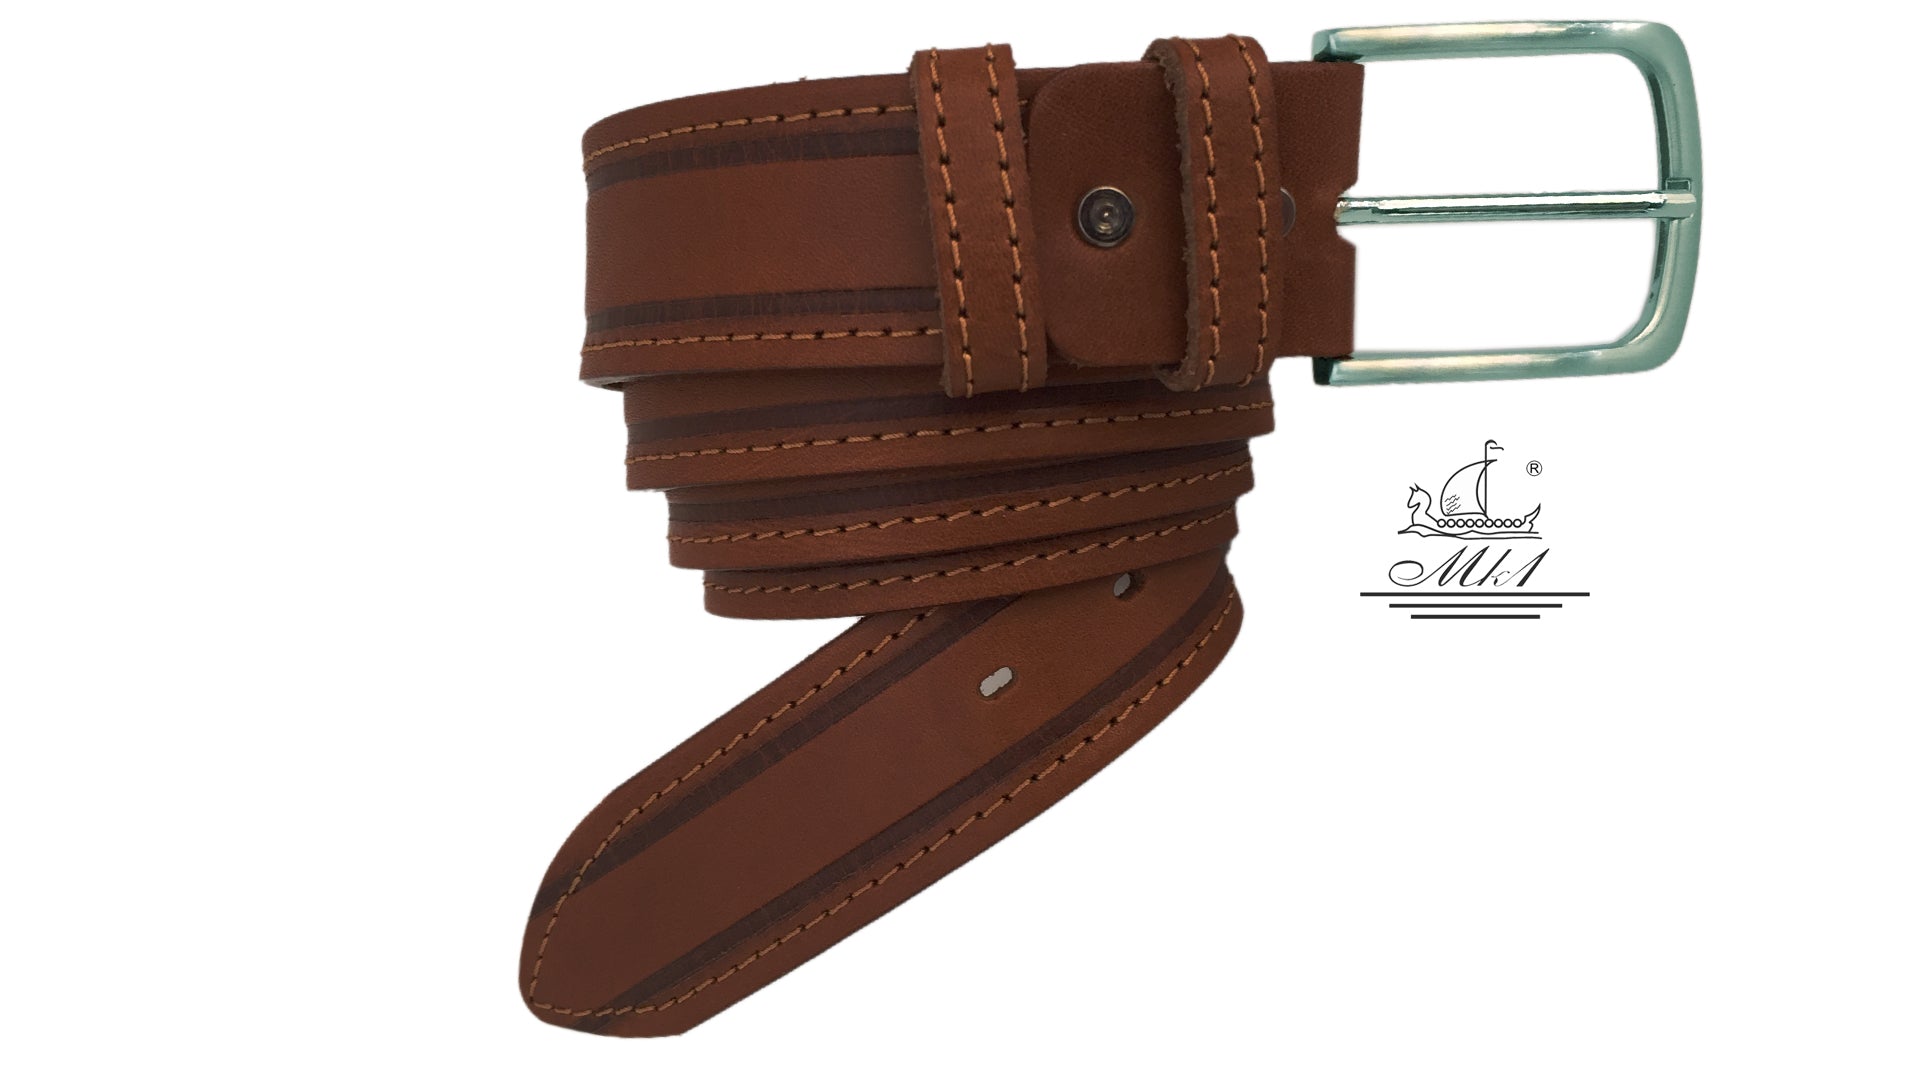 n2699/40t-lg Hand made leather belt